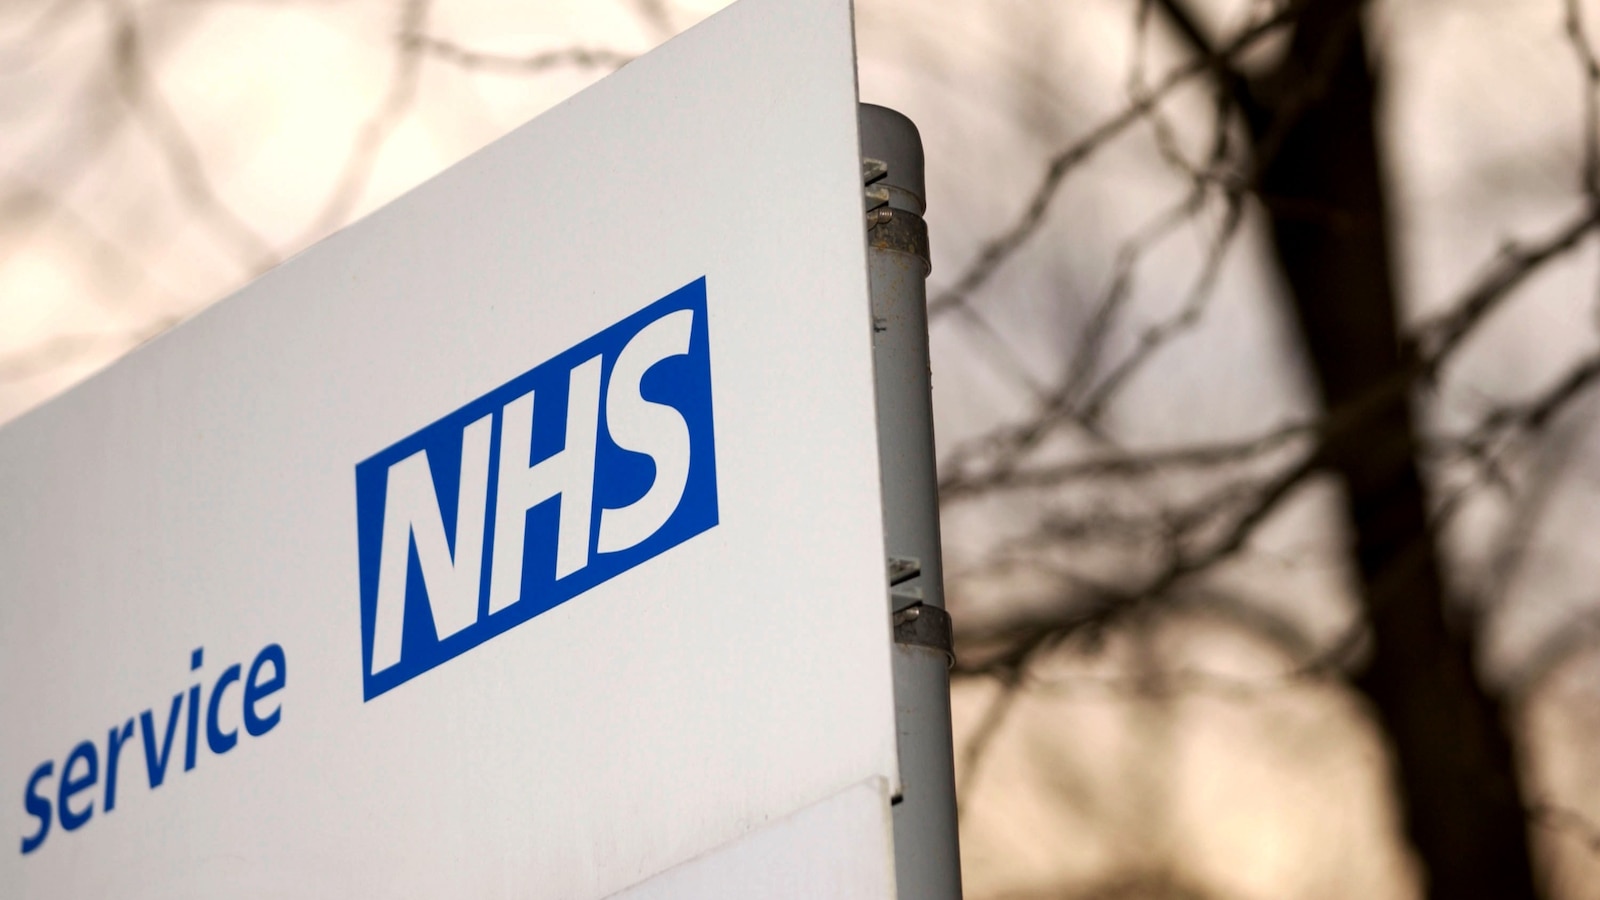 England's NHS halts puberty blockers for transgender youth amid research efforts